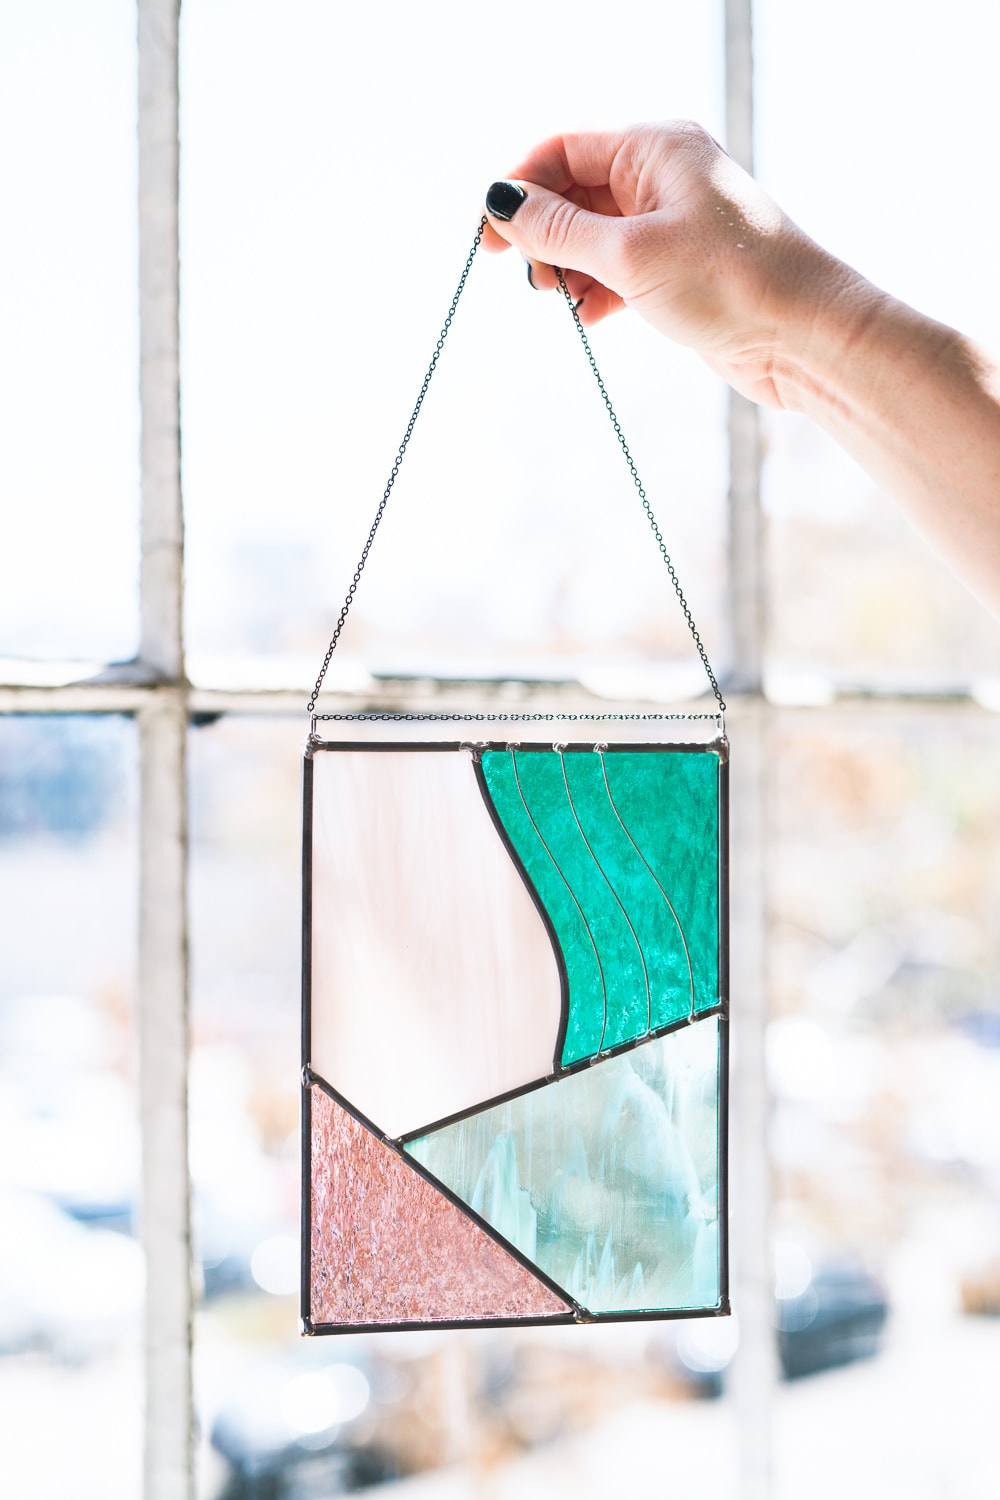 Our second Premium workshop of 2019 explores modern stained glass with artist Lauren Earl.